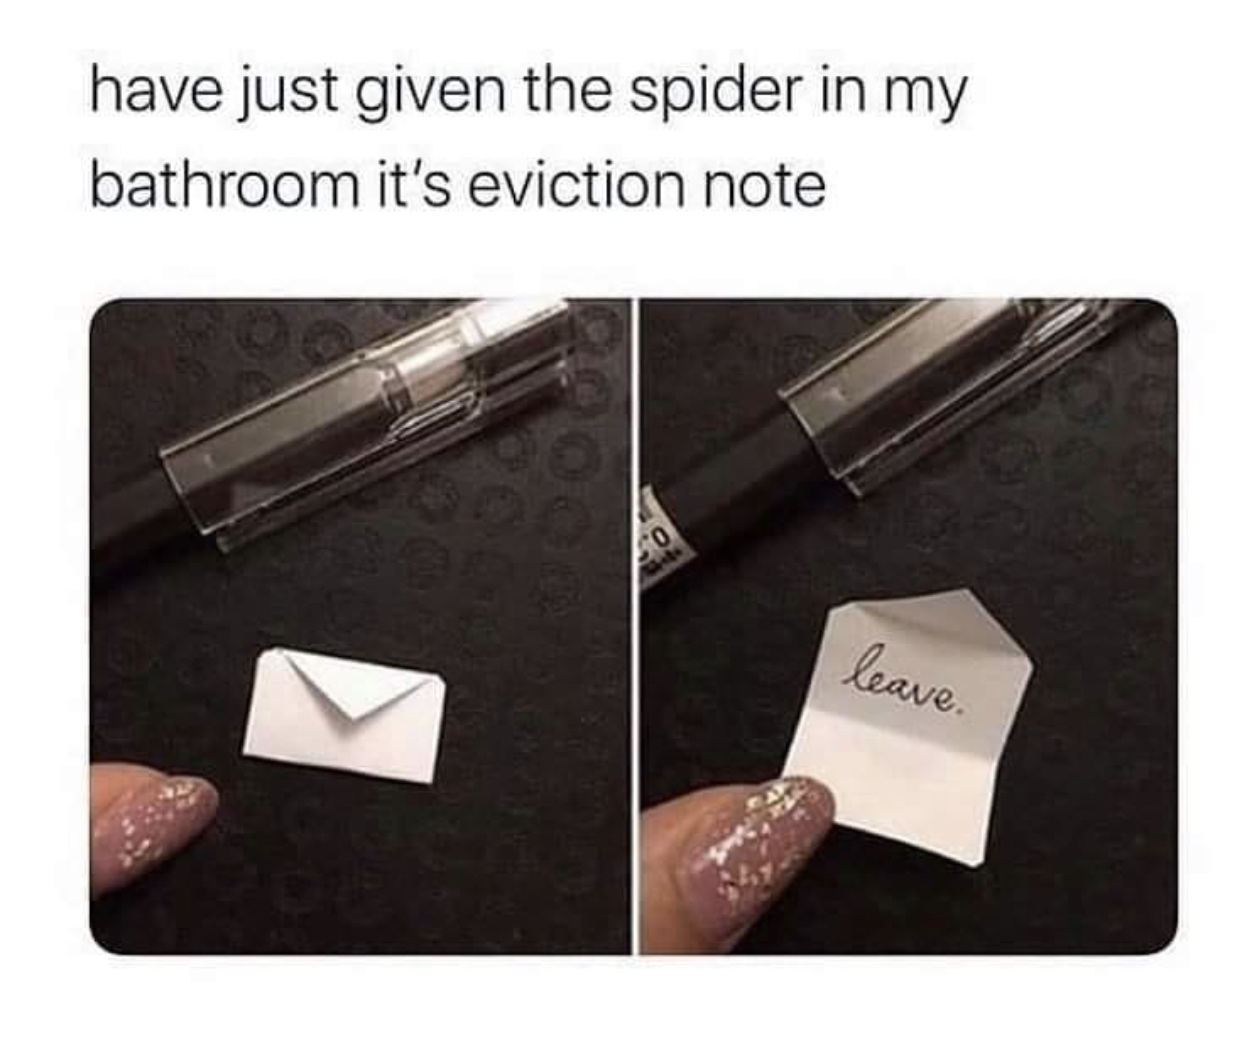 spider eviction meme - have just given the spider in my bathroom it's eviction note leave.